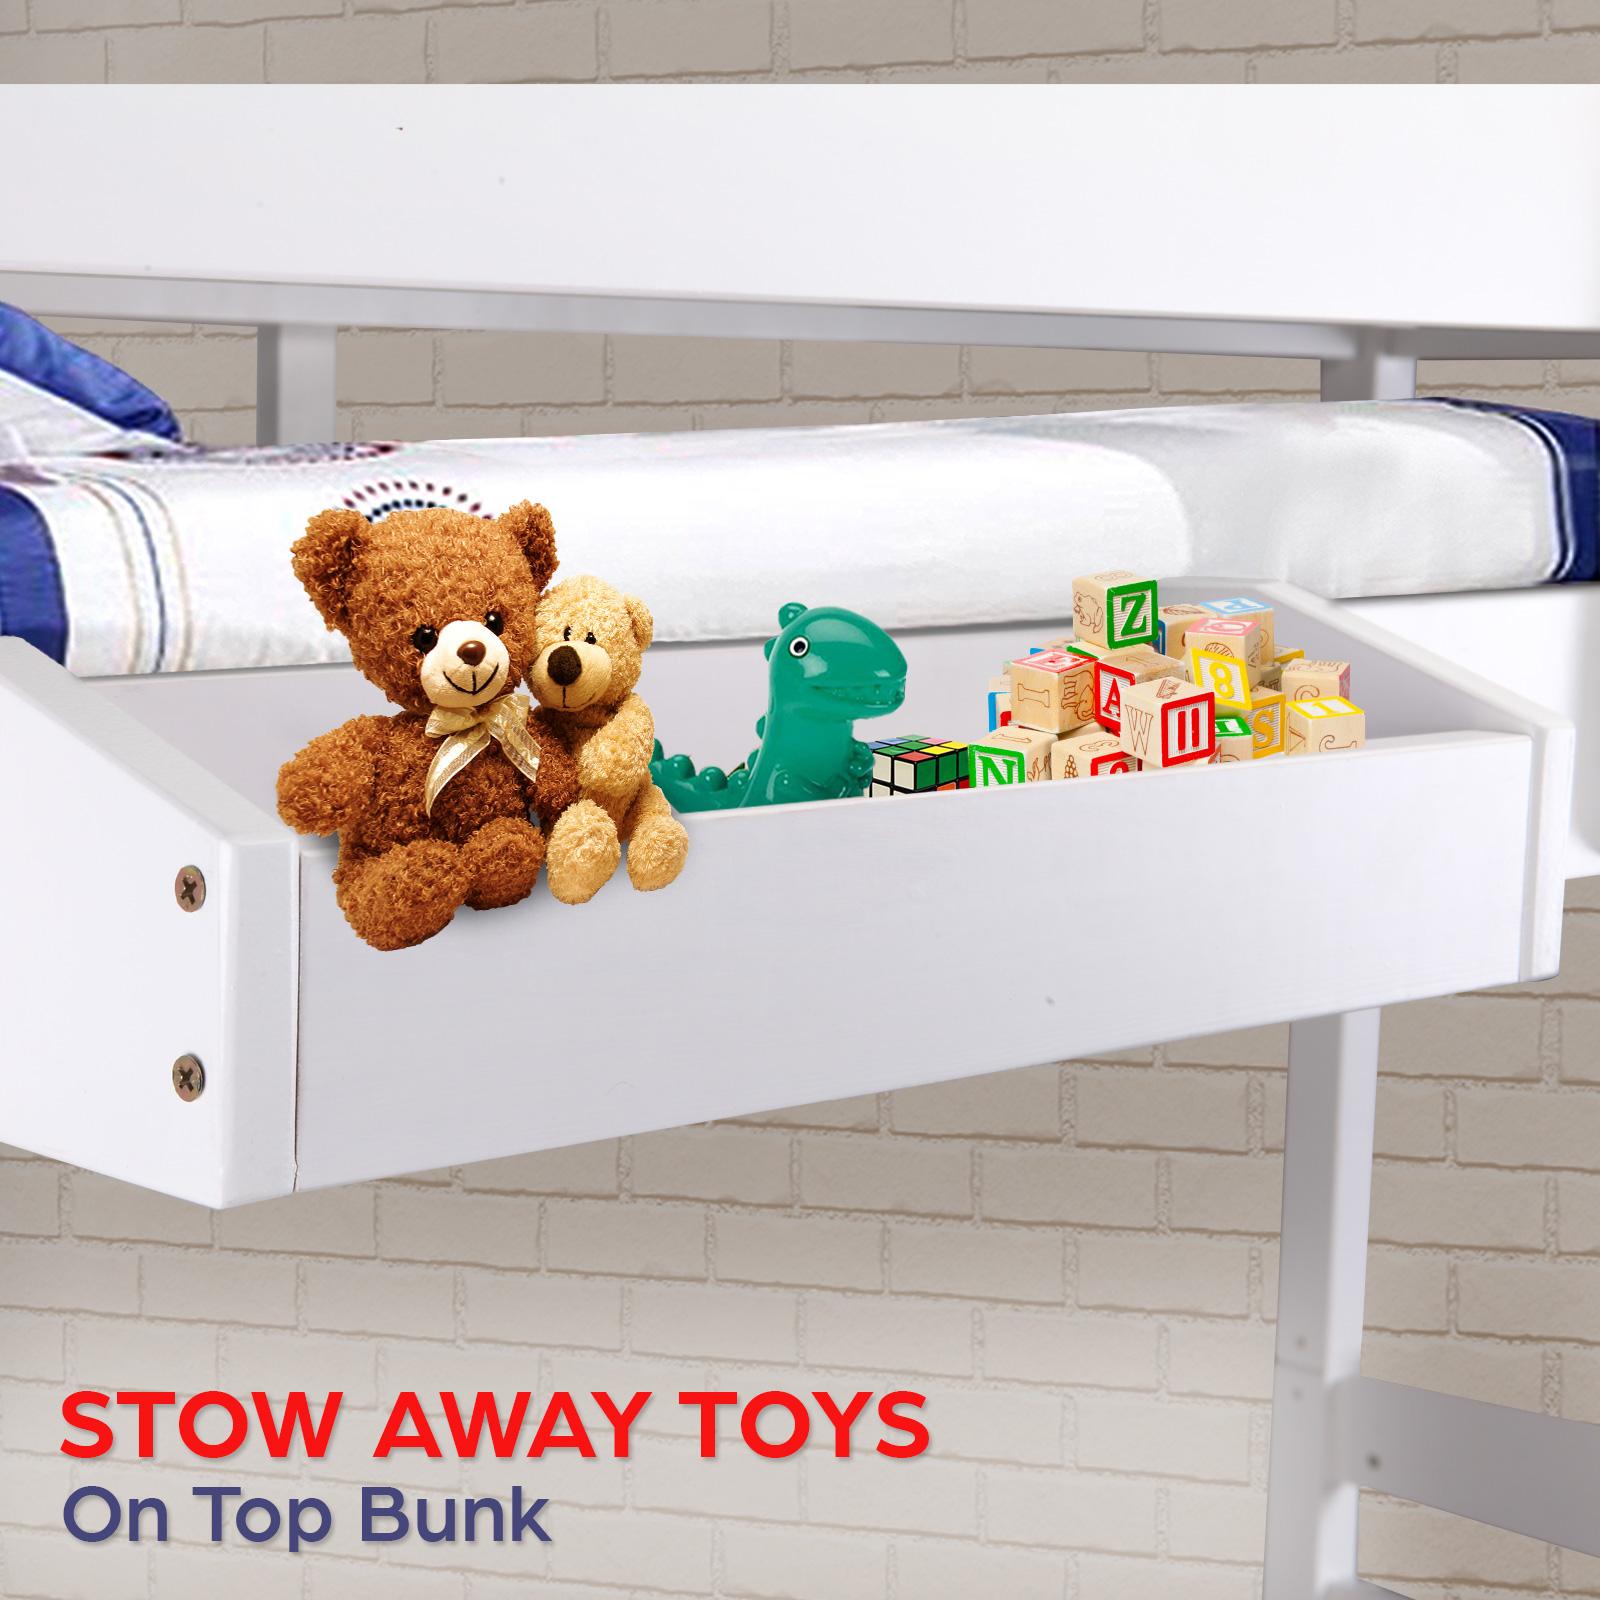 White Convertible Single Bunk Bed for Kids